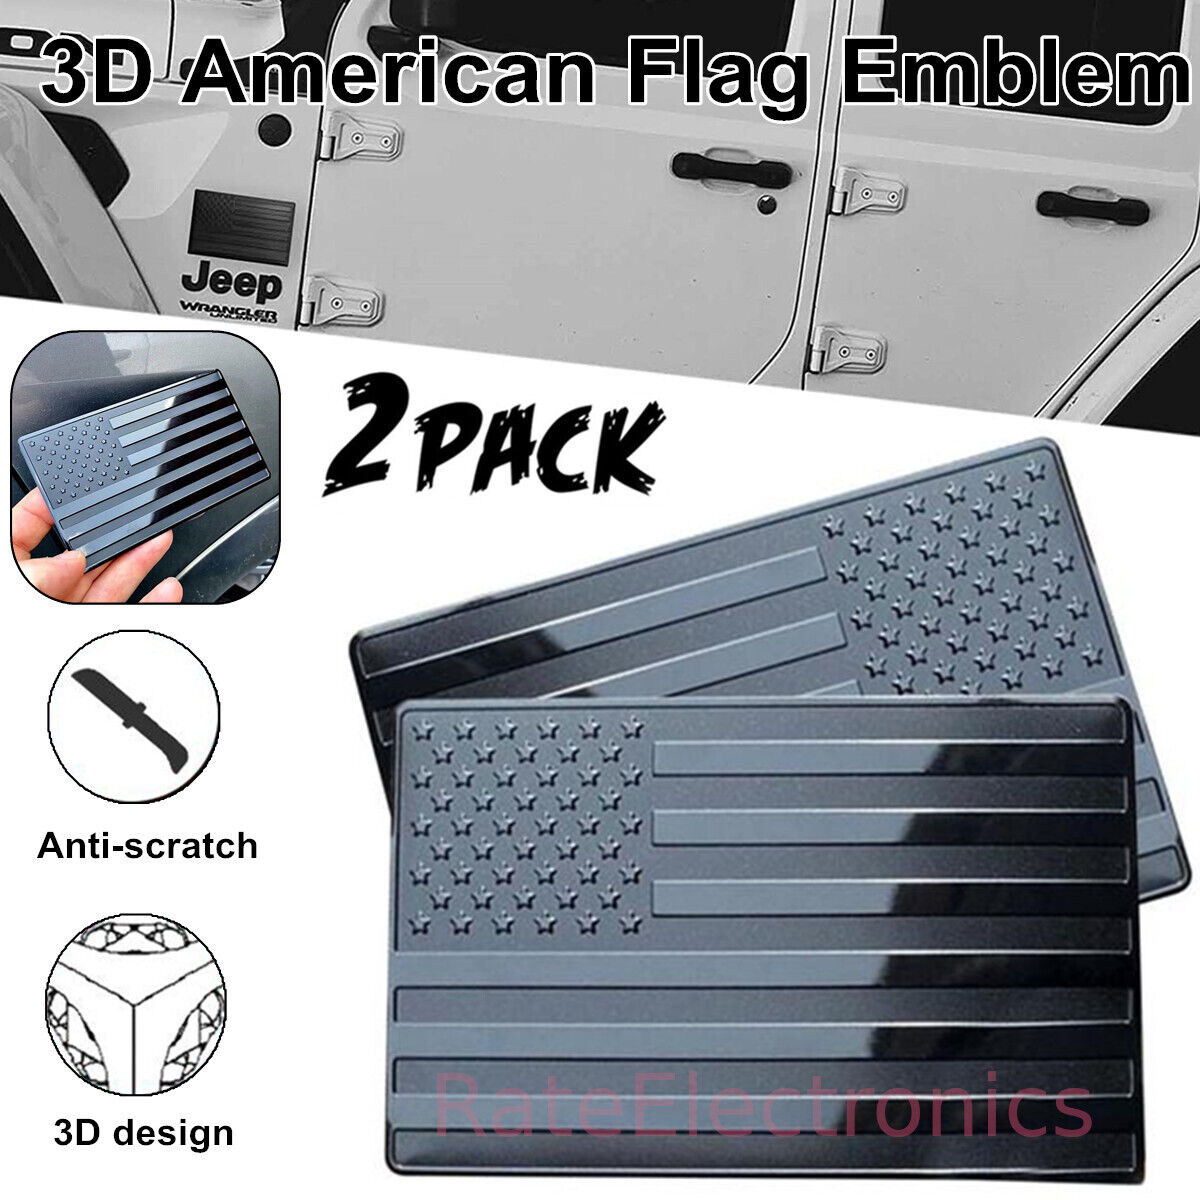 2PC American Flag Car Adhesive Decal 3x5 Heavy Duty for Car Truck SUV Waterproof